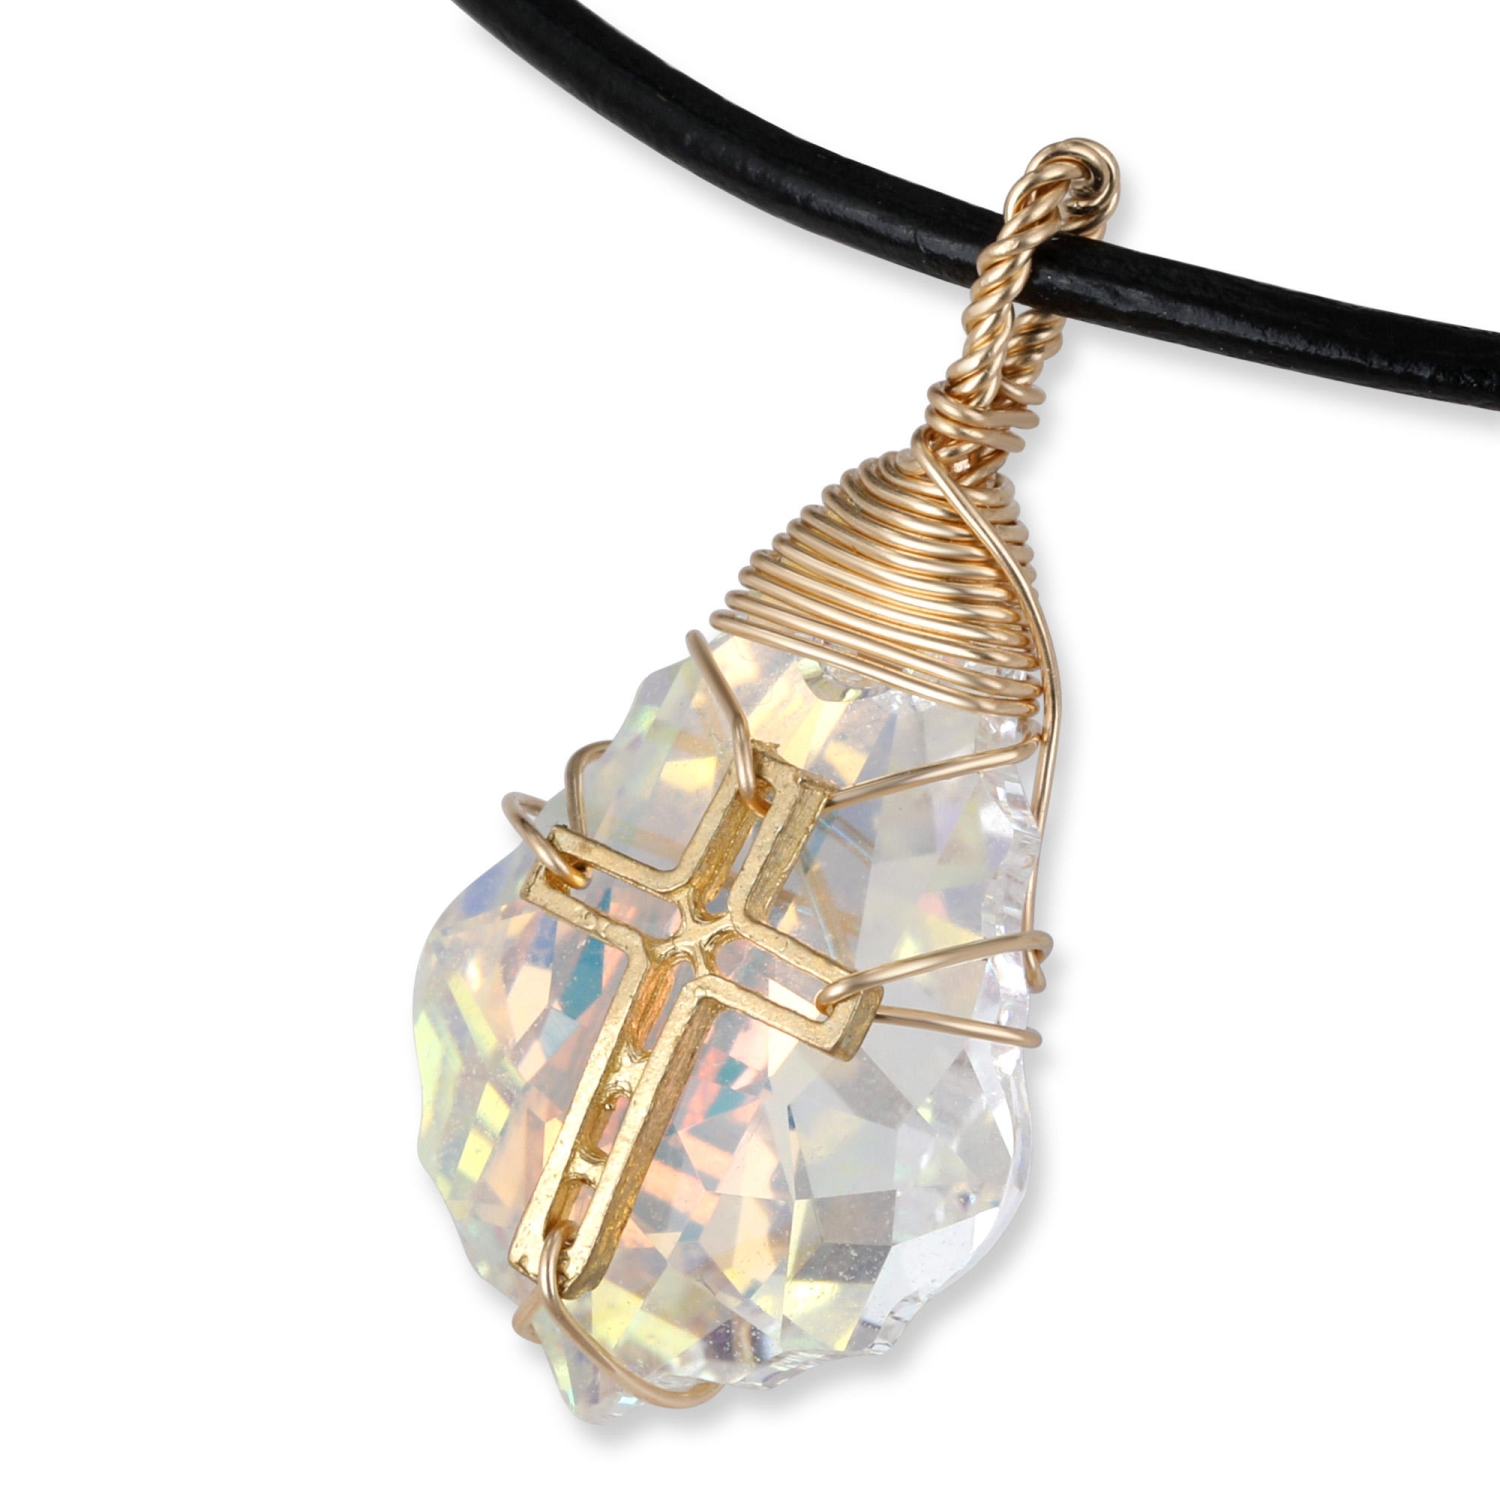 Swarovski Crystal and Gold Filled Postmodern Cross Necklace (Iridescent White) - 1